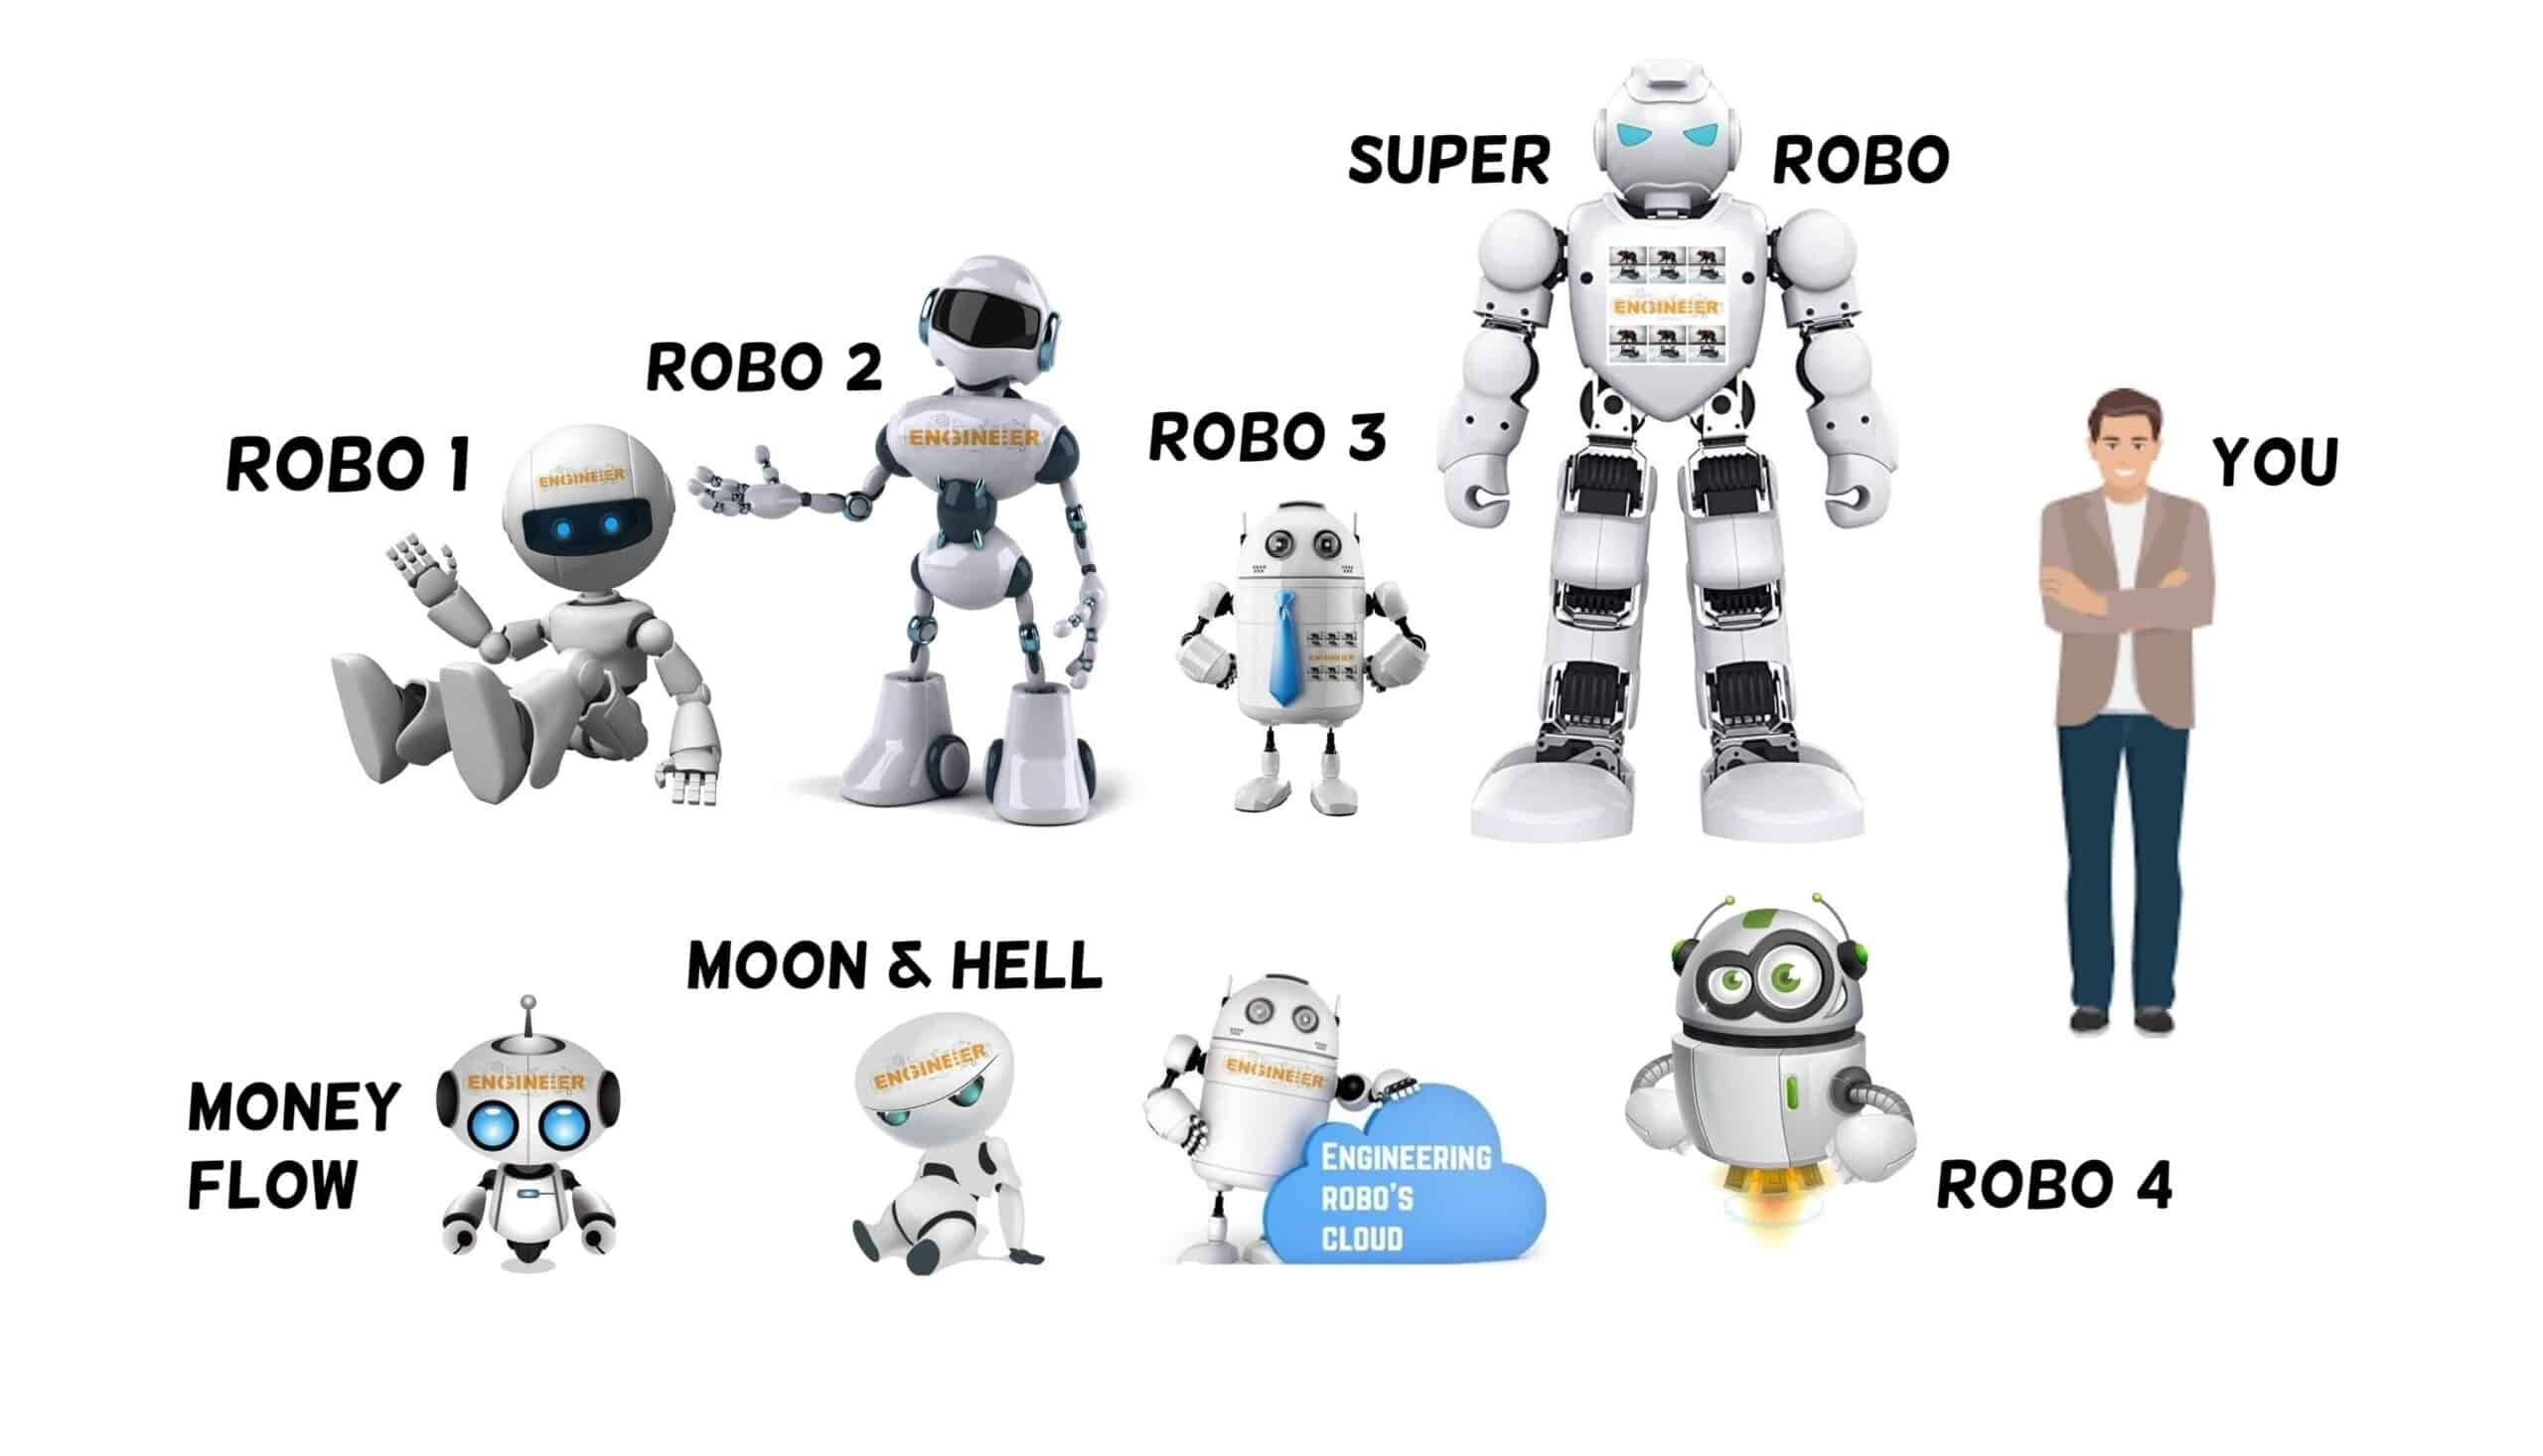 Different types of Robos